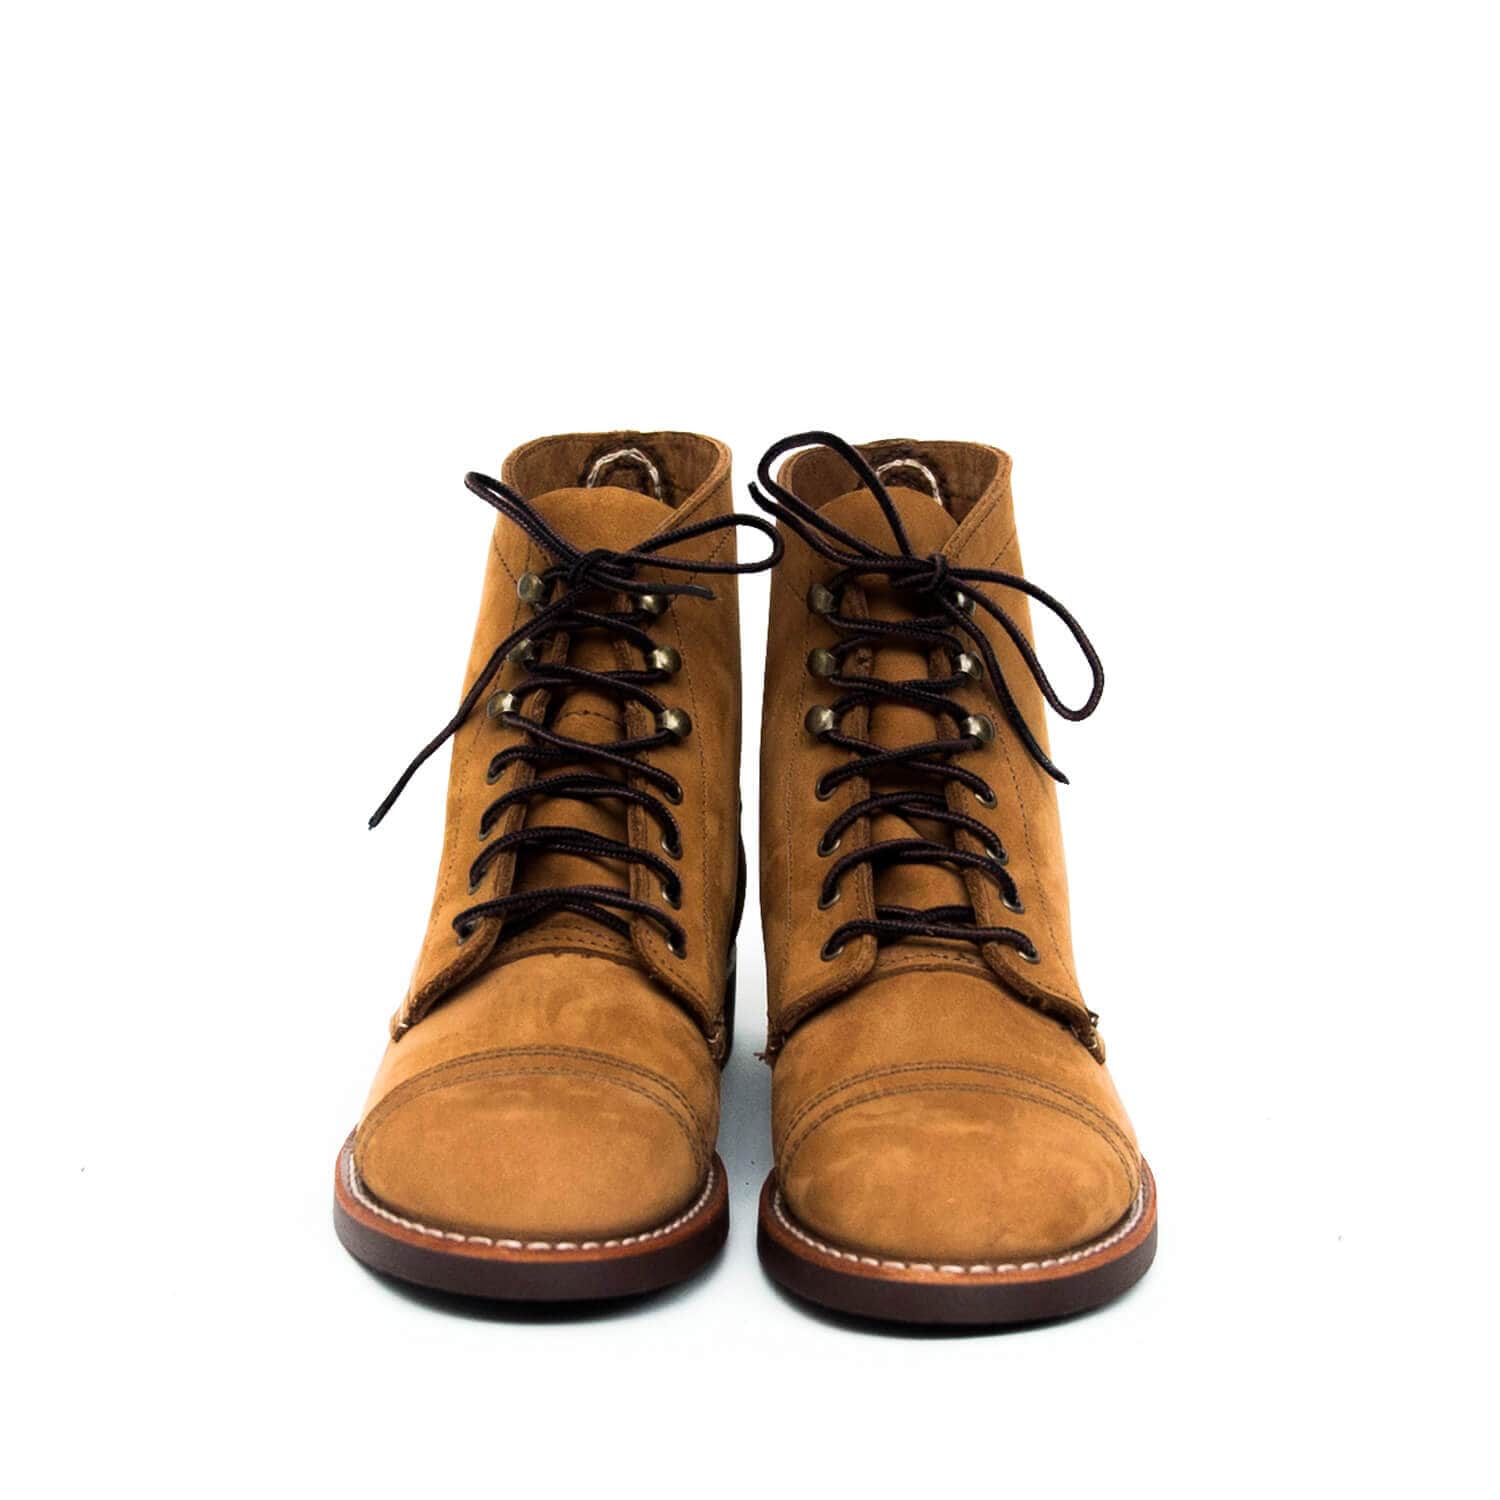 Red Wing - IRON RANGER BOOTS  HBX - Globally Curated Fashion and Lifestyle  by Hypebeast